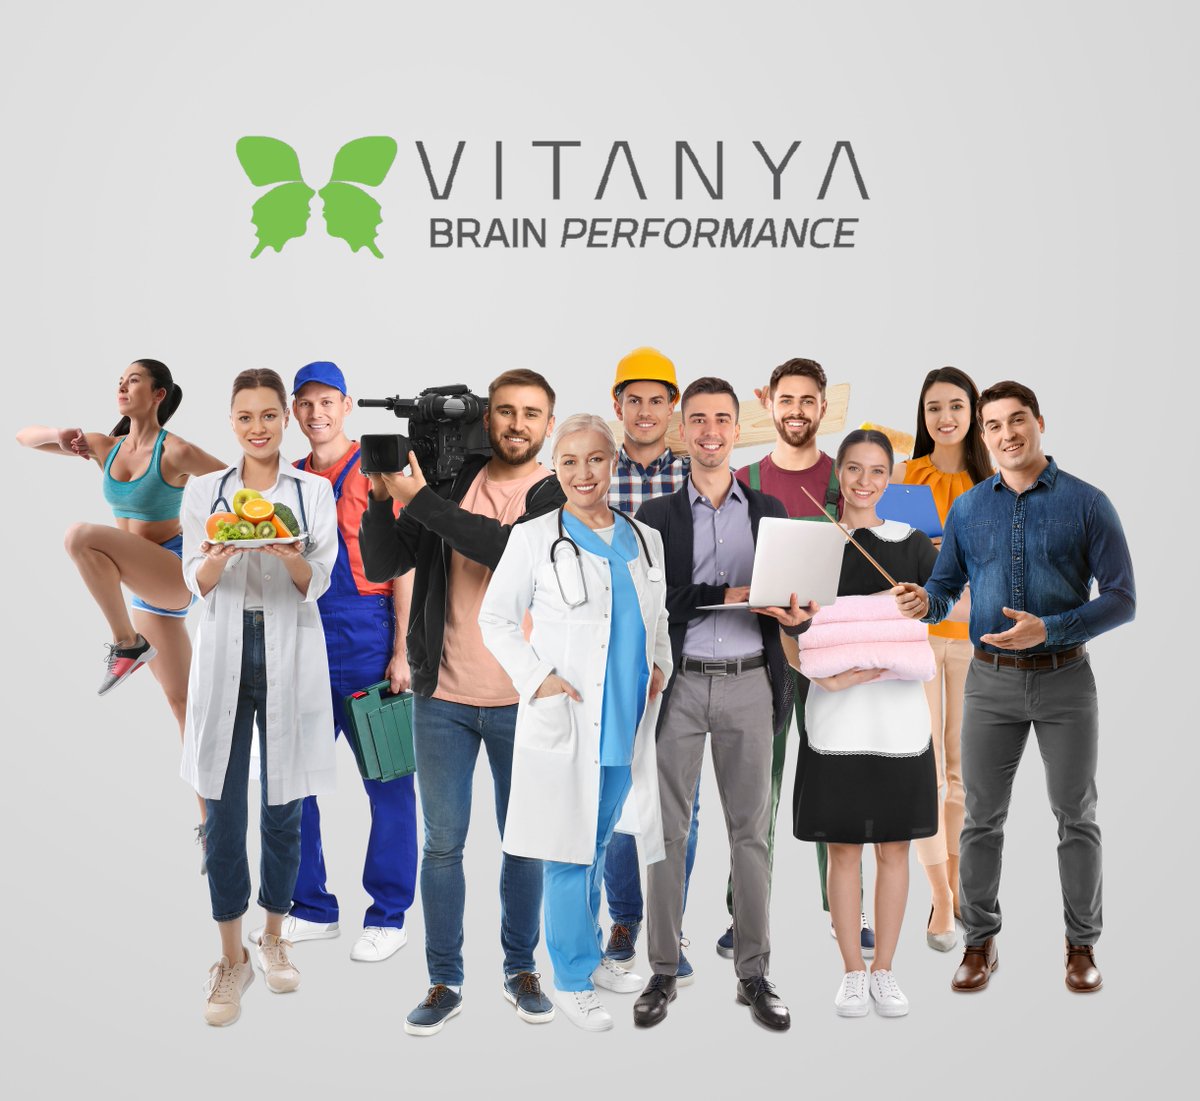 We continue to seek collaboration, with public servants, business leaders, & passionate individuals to make our communities happier, healthier and stronger. Learn more about at vitanya.com #communitypartners #firstresponders #workplacementalhealth